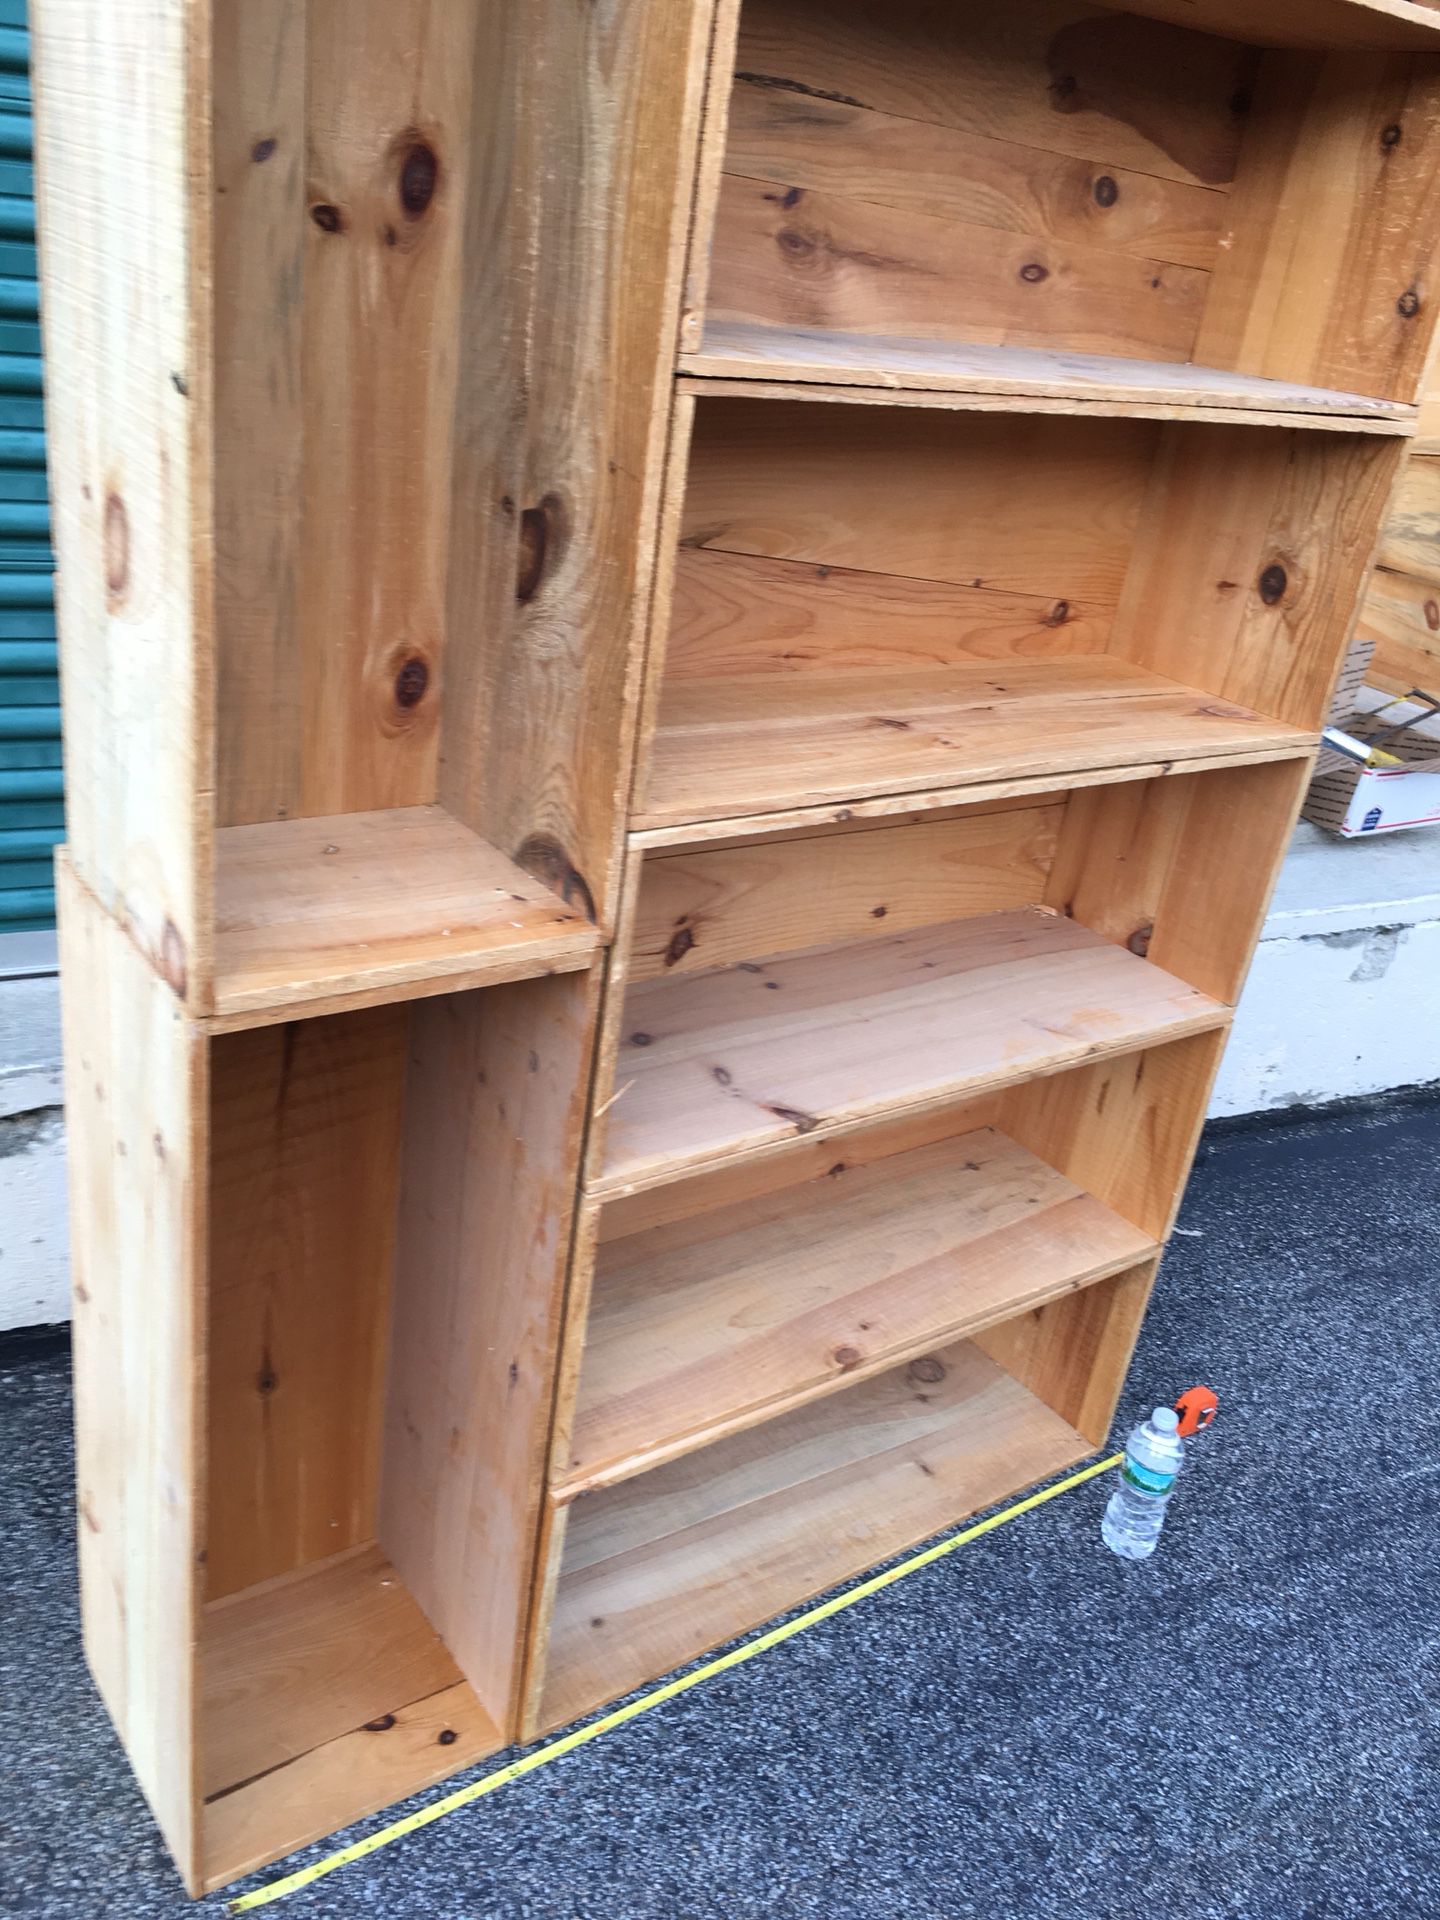 Solid wood rustic adjustable storage crates bookshelves. Lots of combinations $15 each crate